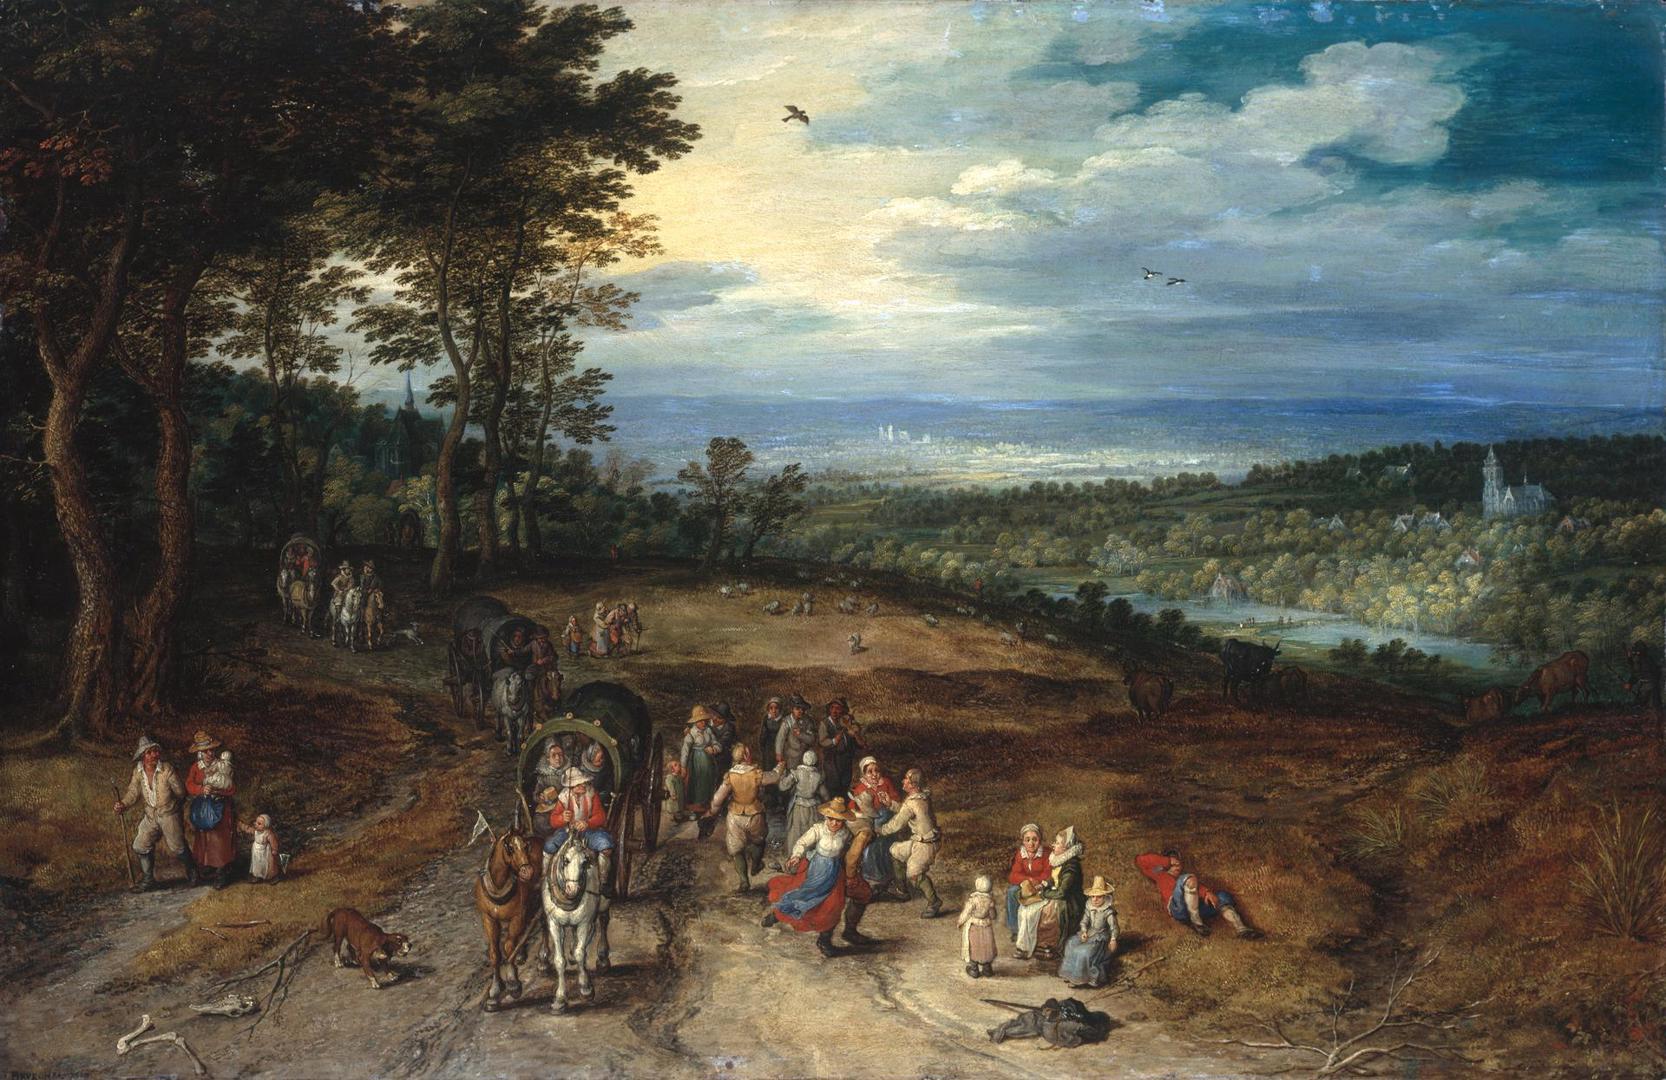 Landscape with Travellers and Peasants on a Track by Jan Brueghel the Elder